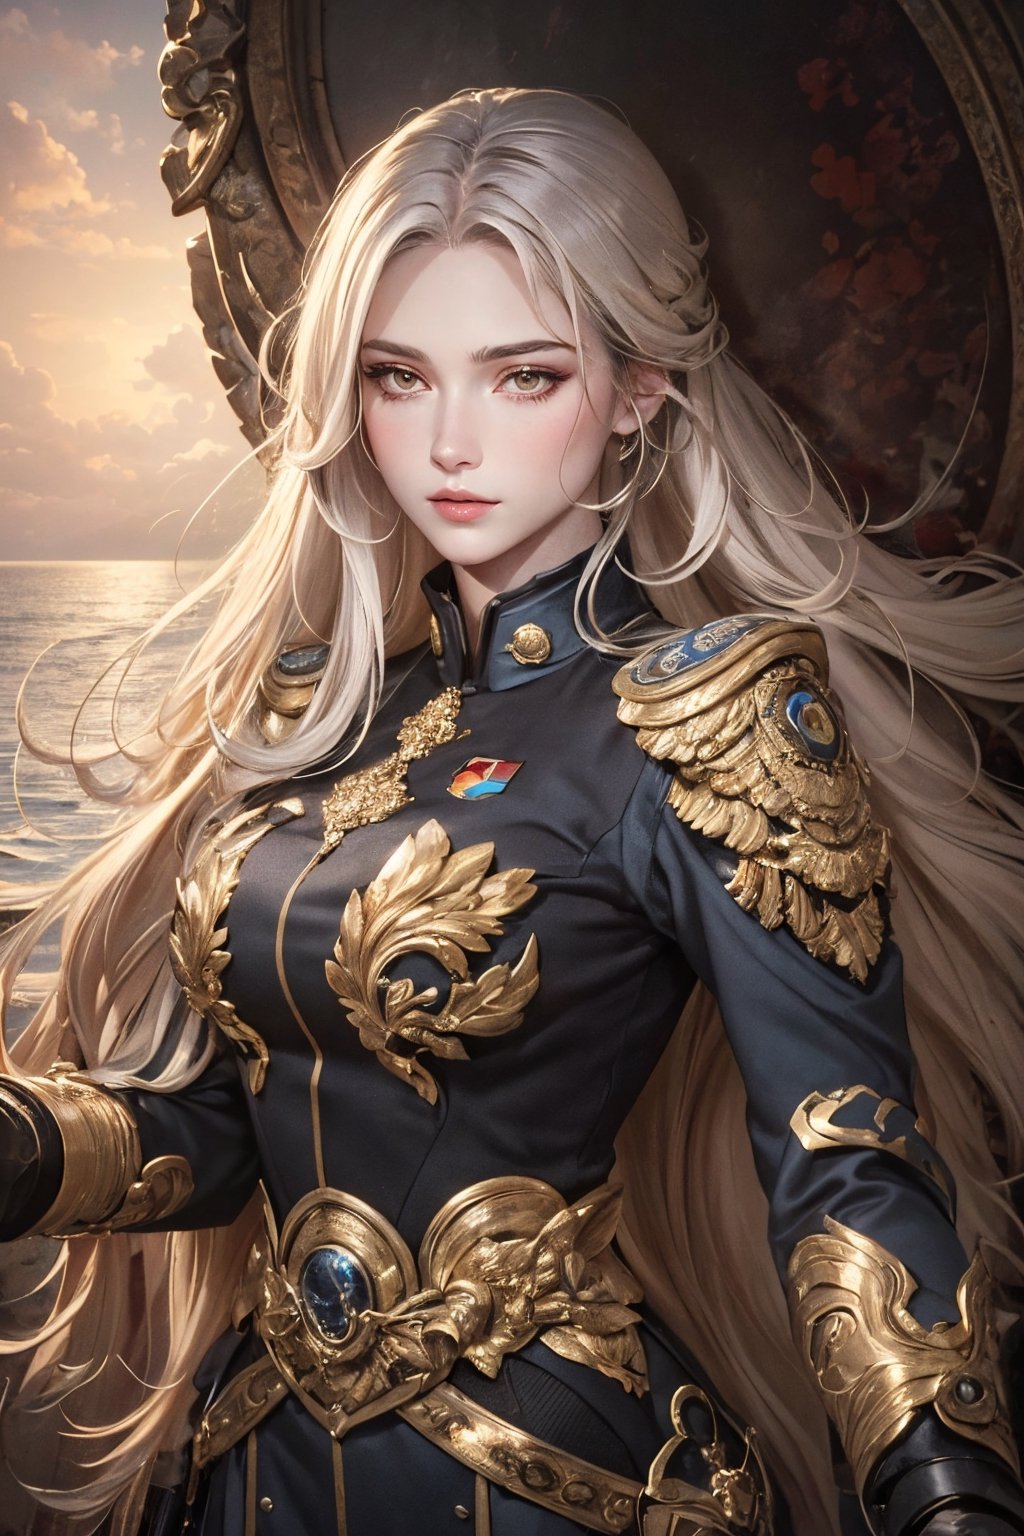 Create an image of a female character in a futuristic military uniform, with long, silky golden hair in gentle waves down to her waist. Her large, luminous amber eyes should be framed by delicate lashes, with porcelain-like skin and a hint of blush on her cheeks. The uniform should be deep ocean blue with bright golden touches and distinctive badges on the shoulders to highlight her position. Her left hand should be delicately supporting a realistic globe, showcasing her protective yet firm demeanor. The backdrop should be a blend of soft and technological elements, reflecting her dual nature of tenderness and determination. The art style should be in the aesthetic of high-detail anime, with a vertical aspect ratio.